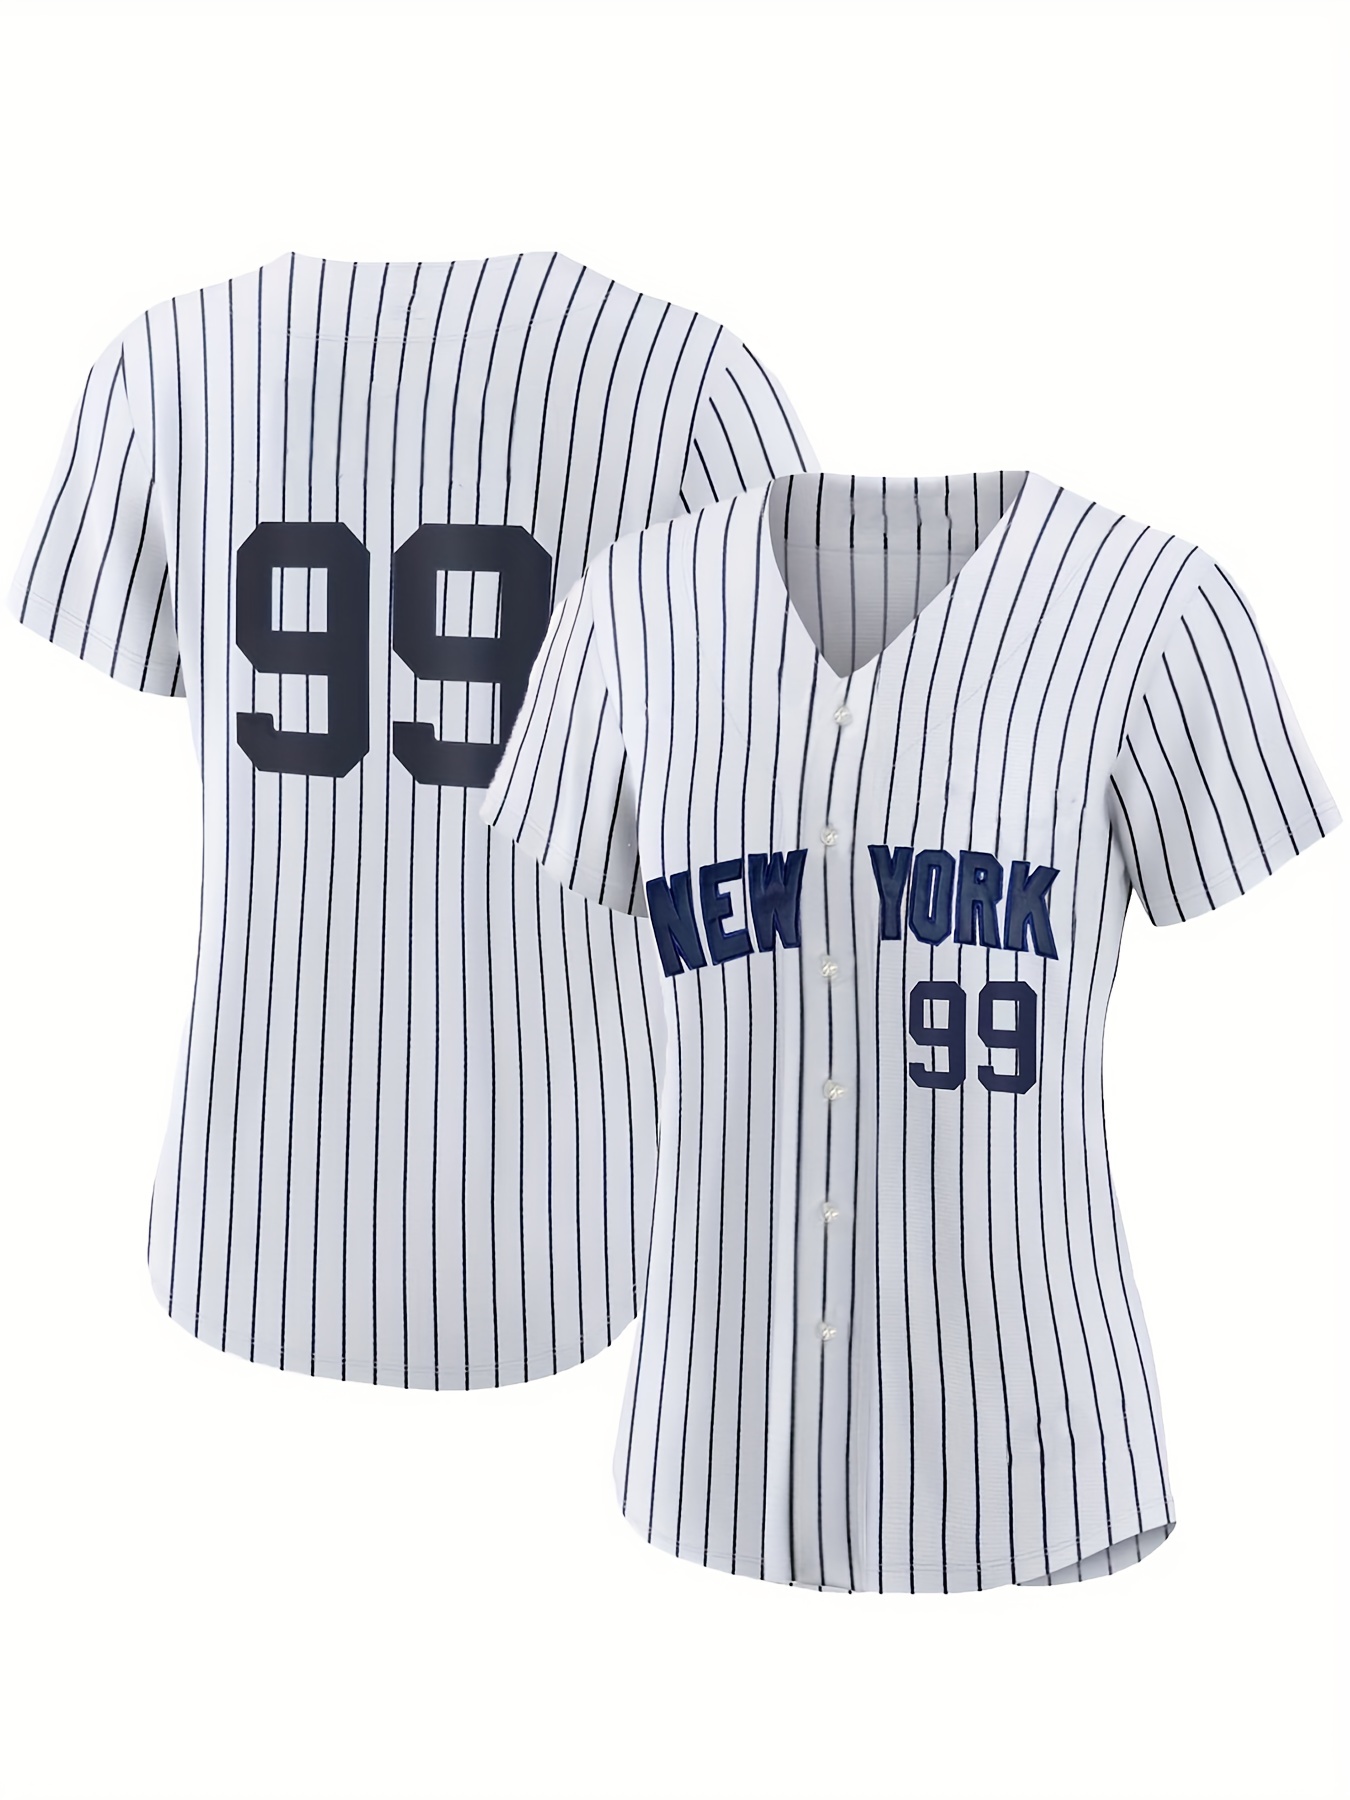  New York 99 Baseball Jerseys, Men and Women NY Baseball Shirts,  90s Hip Hop Button Down Baseball Clothing for Party, Blue White S :  Clothing, Shoes & Jewelry